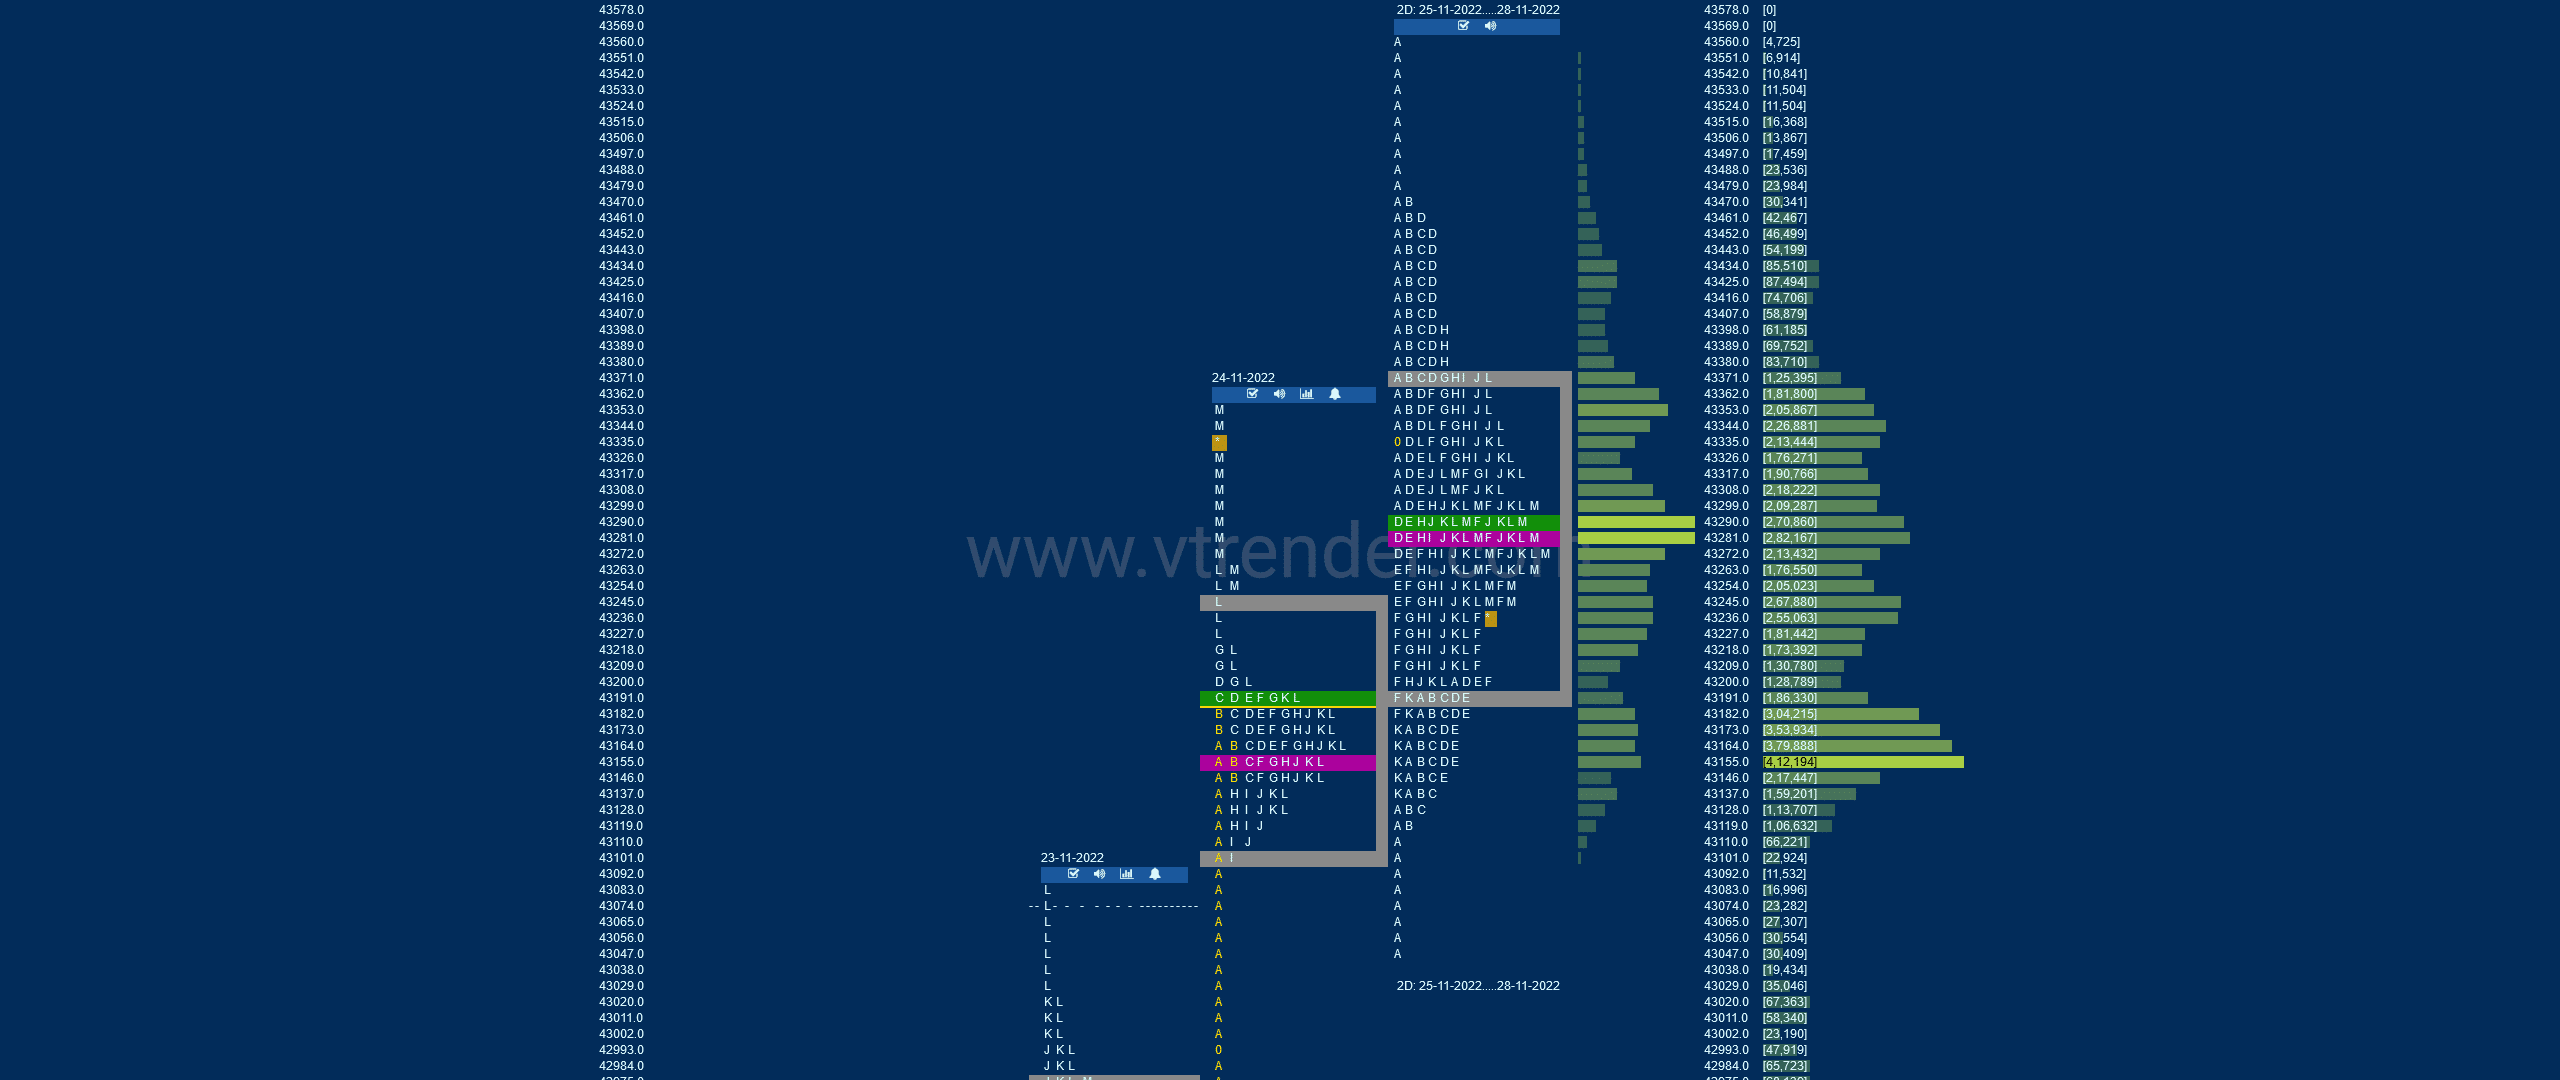 Bnf 2Db 1 Market Profile Analysis Dated 28Th Nov 2022 Banknifty Futures, Charts, Day Trading, Intraday Trading, Intraday Trading Strategies, Market Profile, Market Profile Trading Strategies, Nifty Futures, Order Flow Analysis, Support And Resistance, Technical Analysis, Trading Strategies, Volume Profile Trading